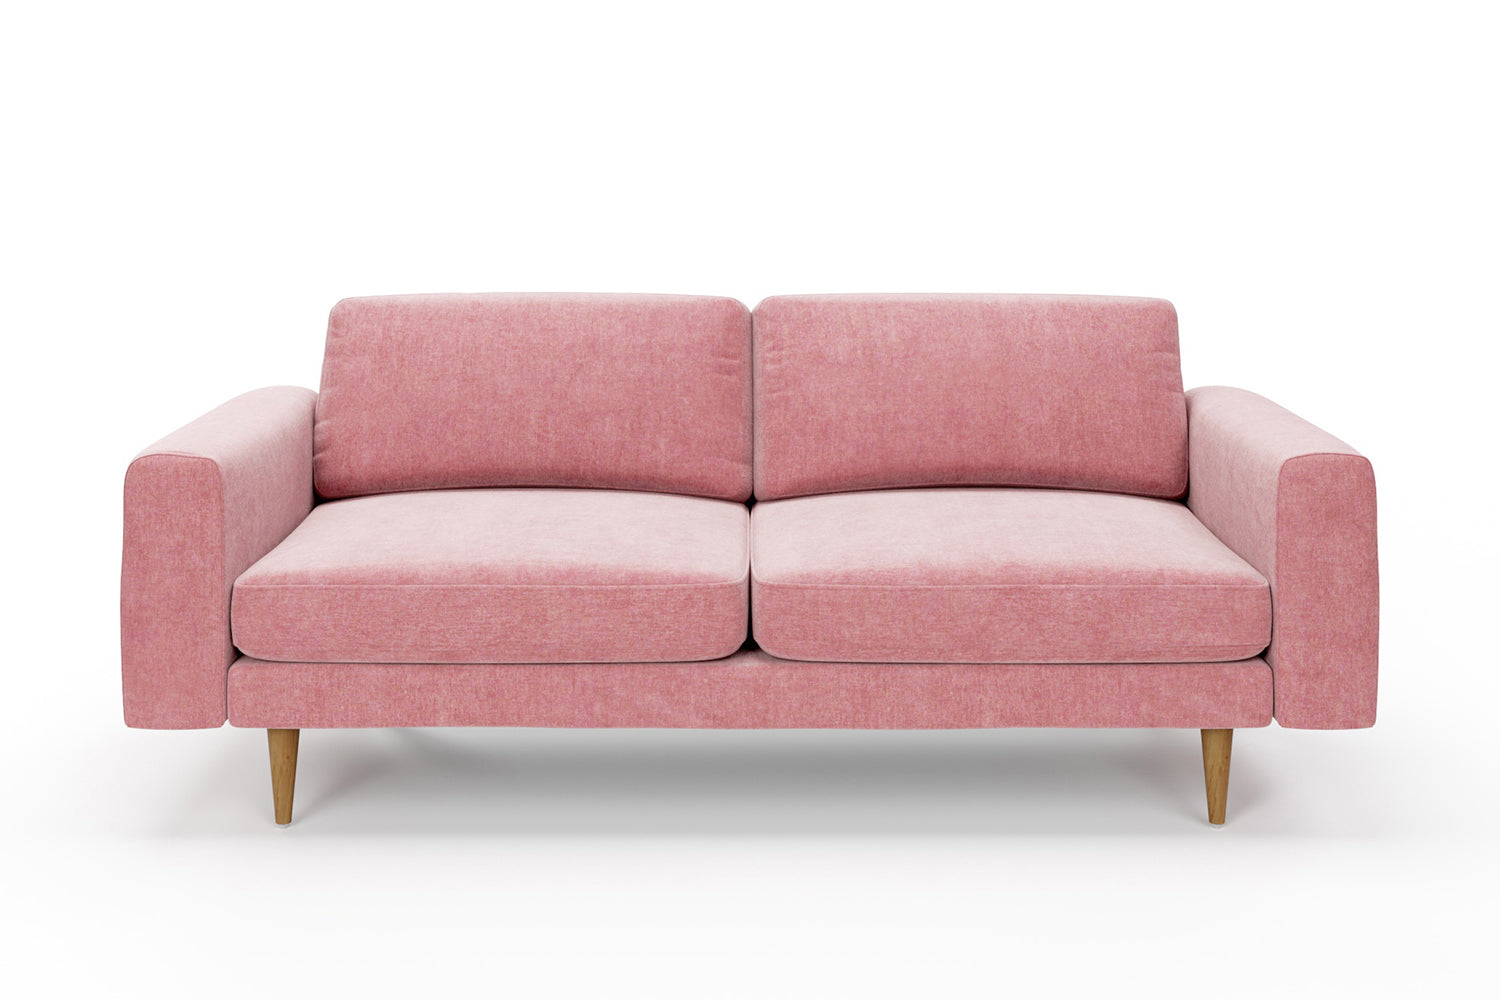 SNUG | The Big Chill 3 Seater Sofa in Blush Coral variant_40621895122992